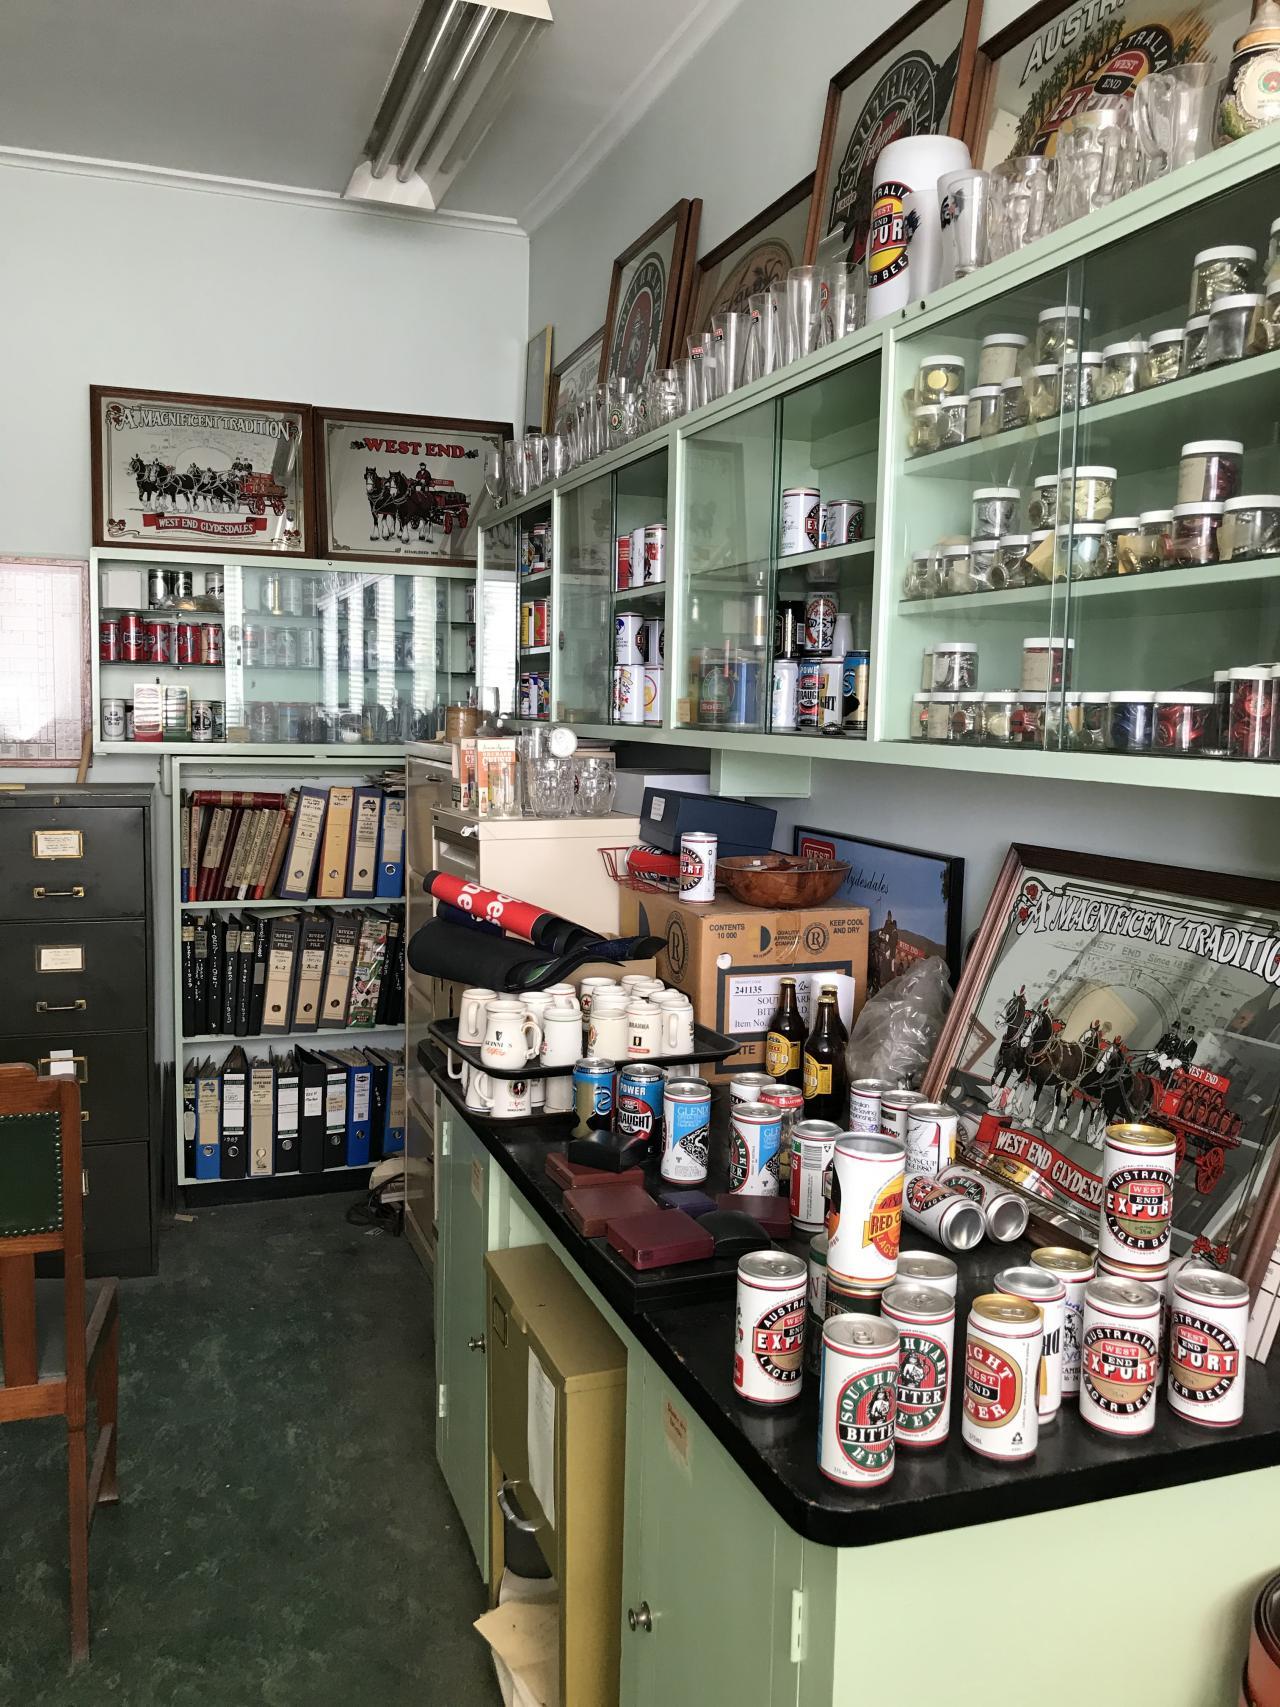 One of the store room featuring records and memorabilia of the SA Brewing Company.